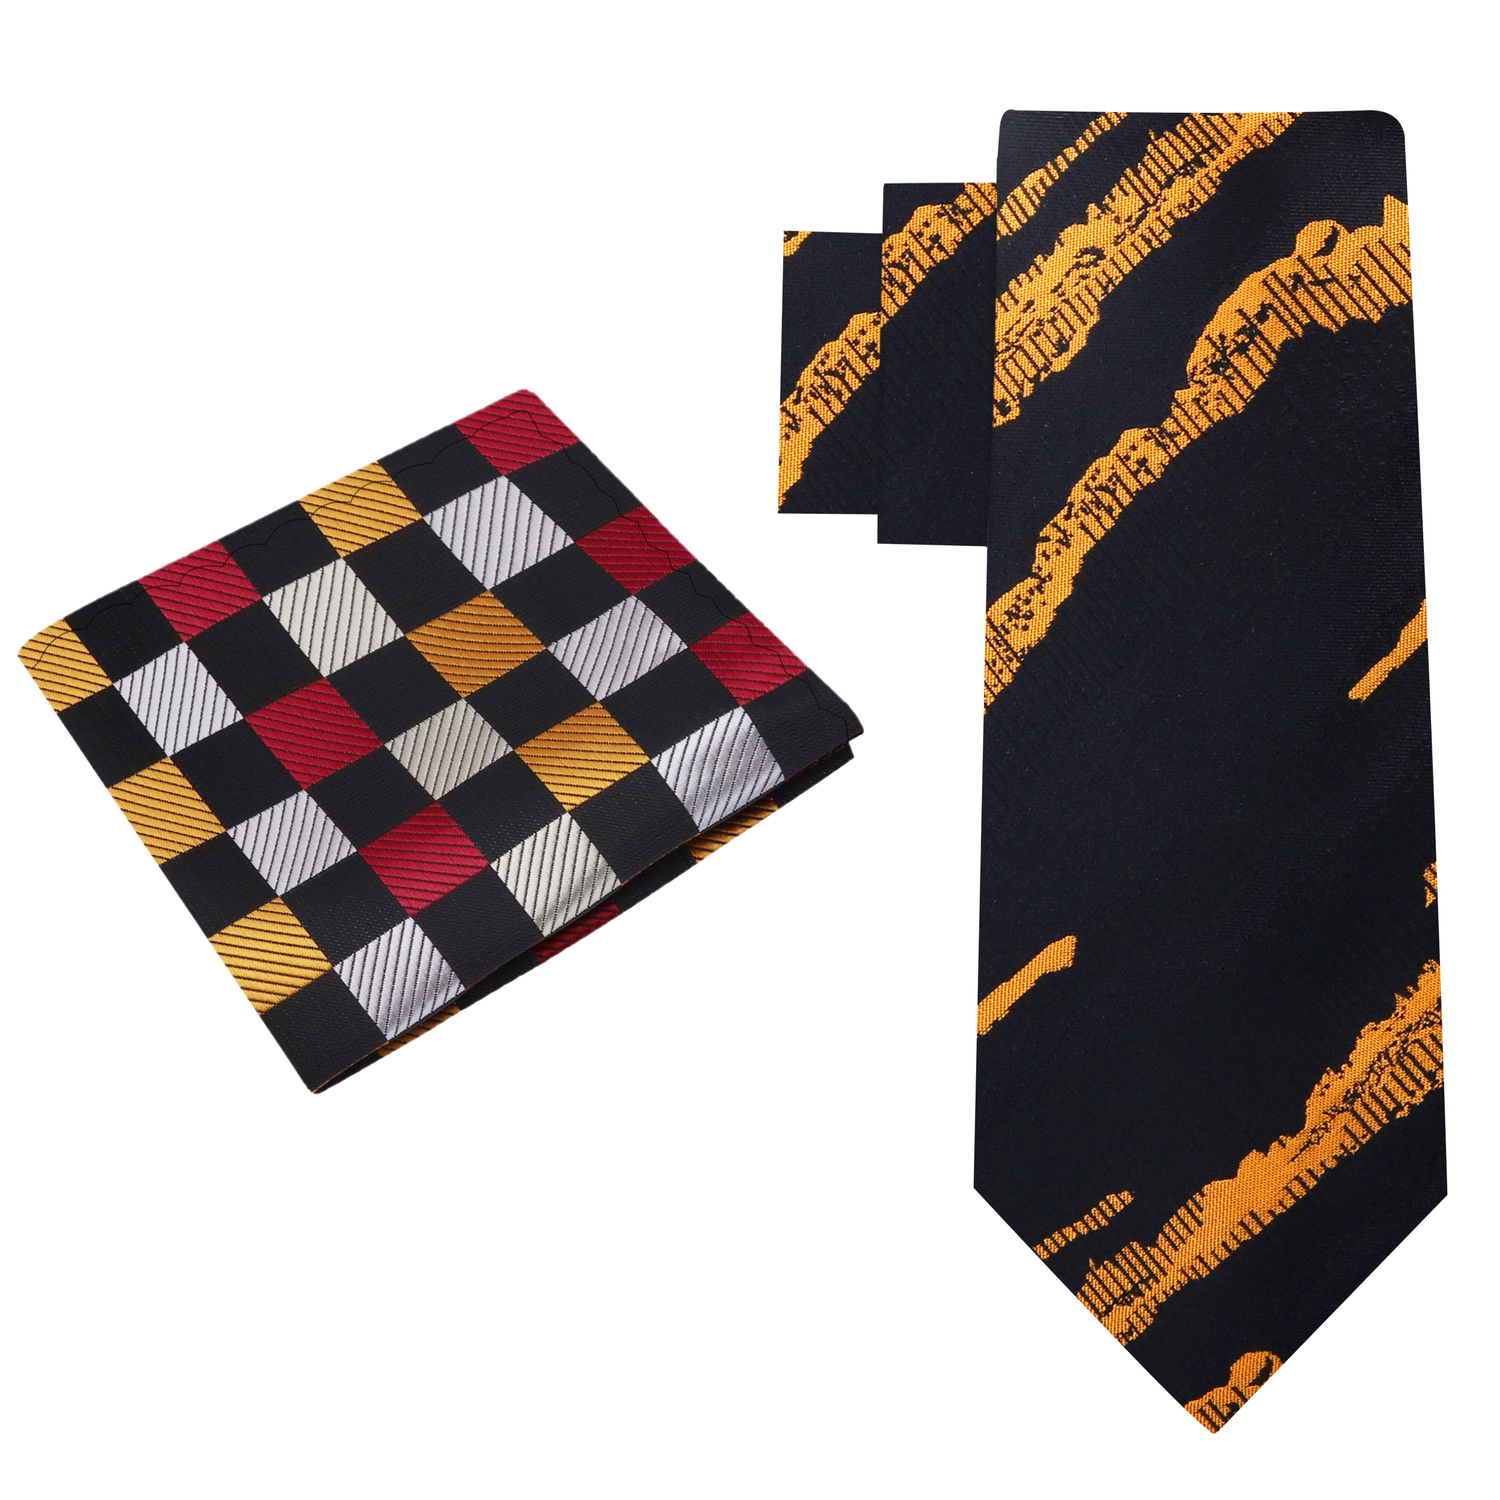 Alt View: Black and Metallic Copper Abstract Lines Tie and Geometric Square